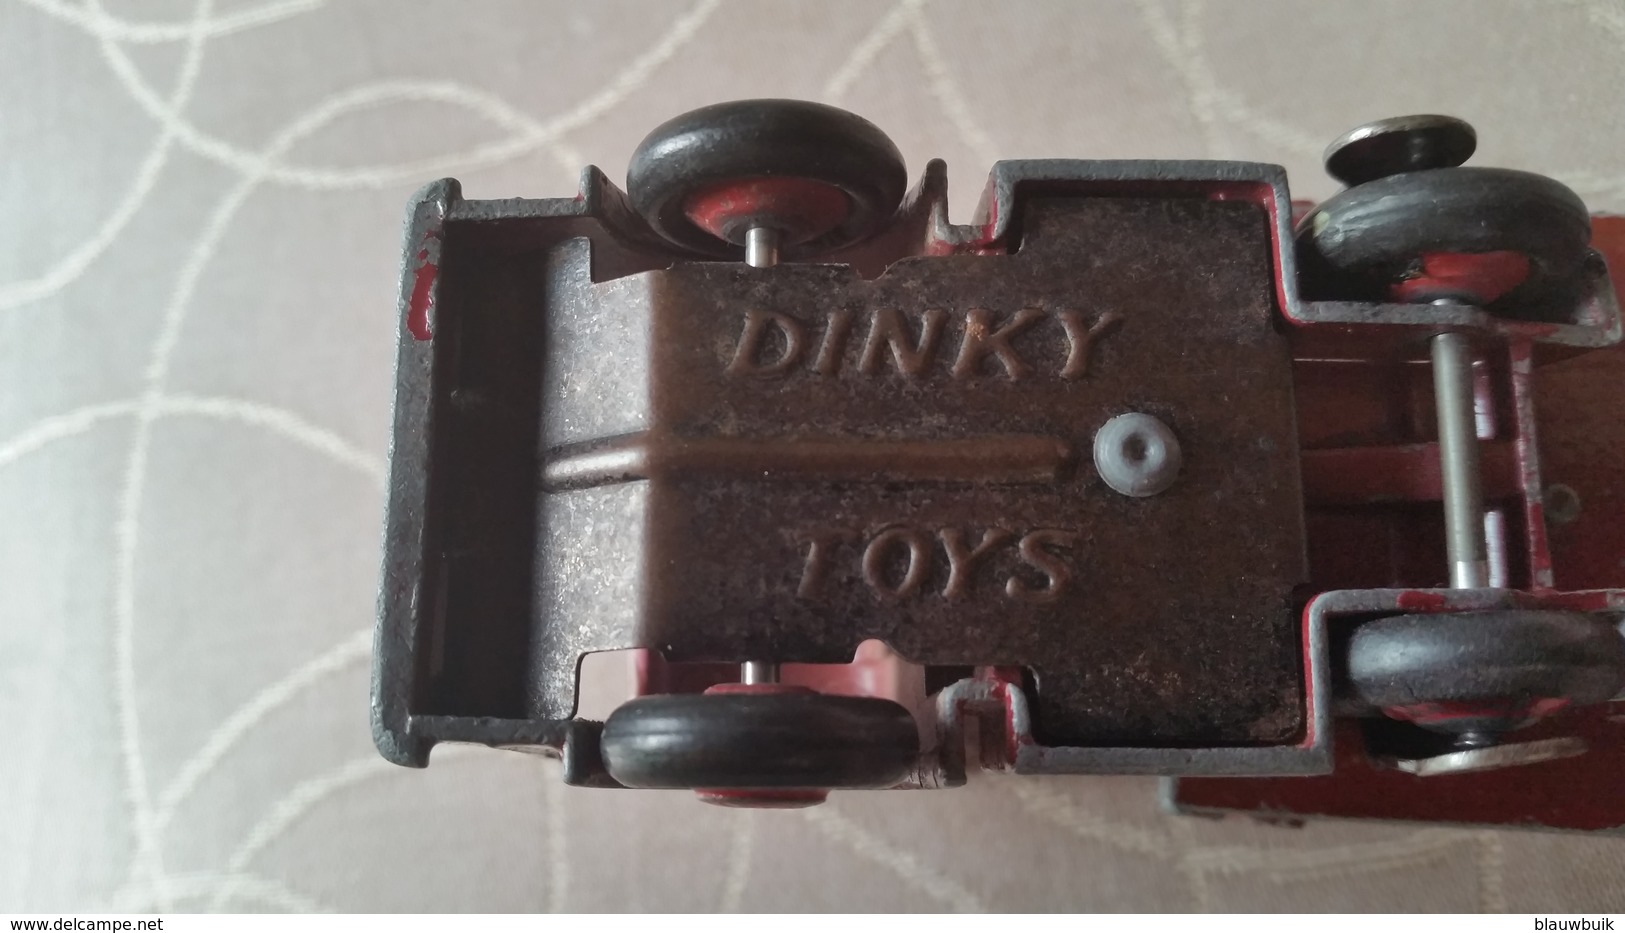 dinky toys 421 30w 30 w hindle smart electric articulated